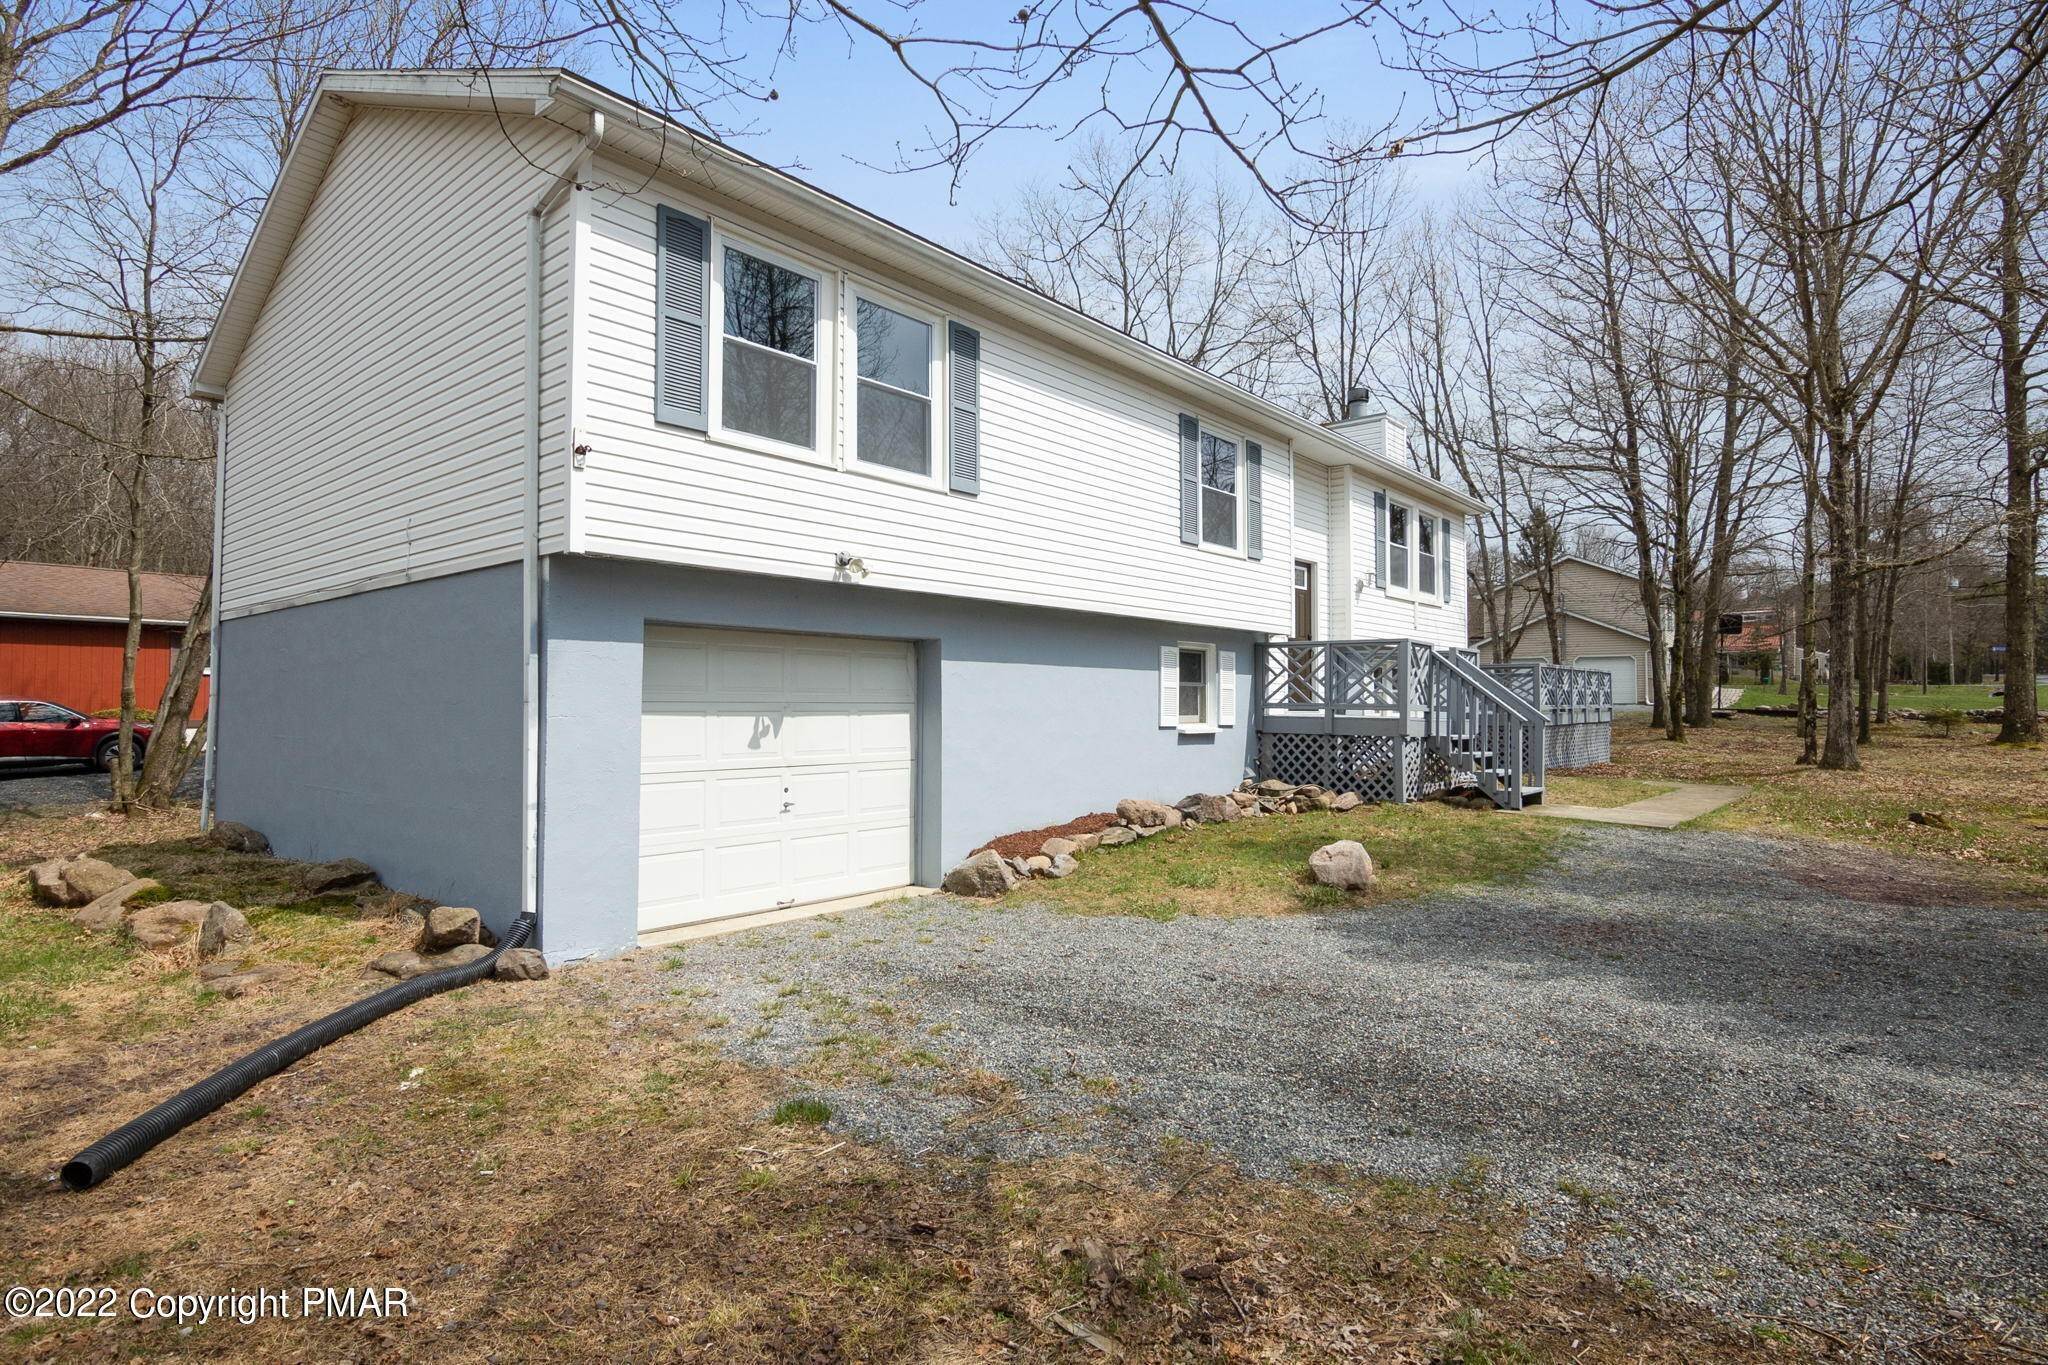 61. Single Family Homes for Sale at 105 Fawn Ln Albrightsville, Pennsylvania 18210 United States